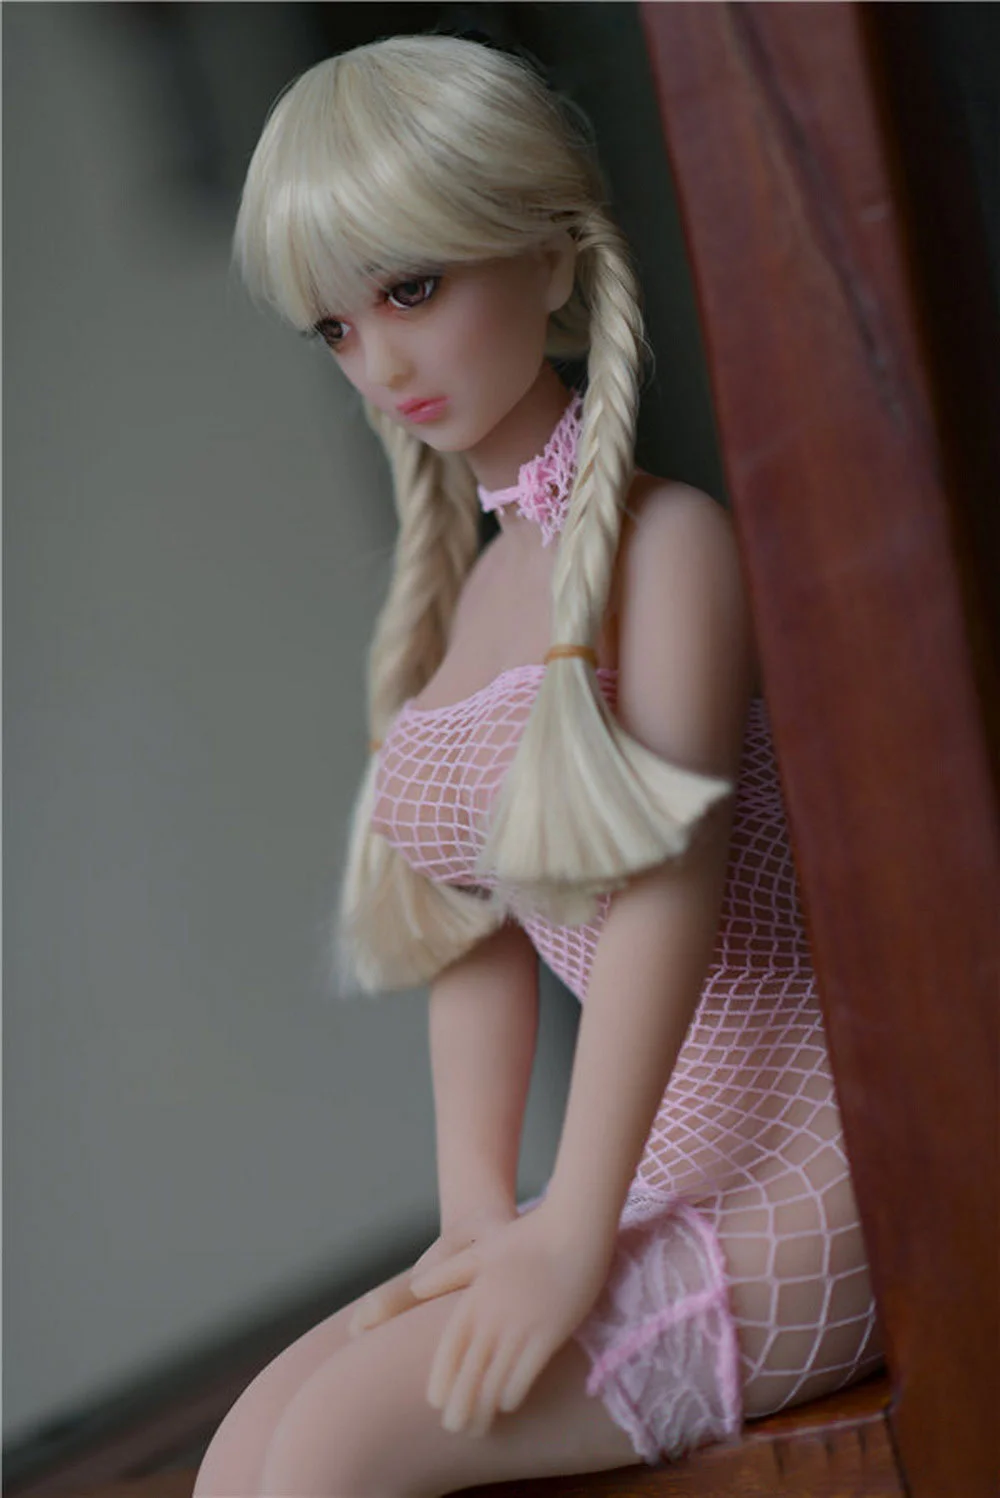 American Realistic Big Tits Young Blonde Sex Doll